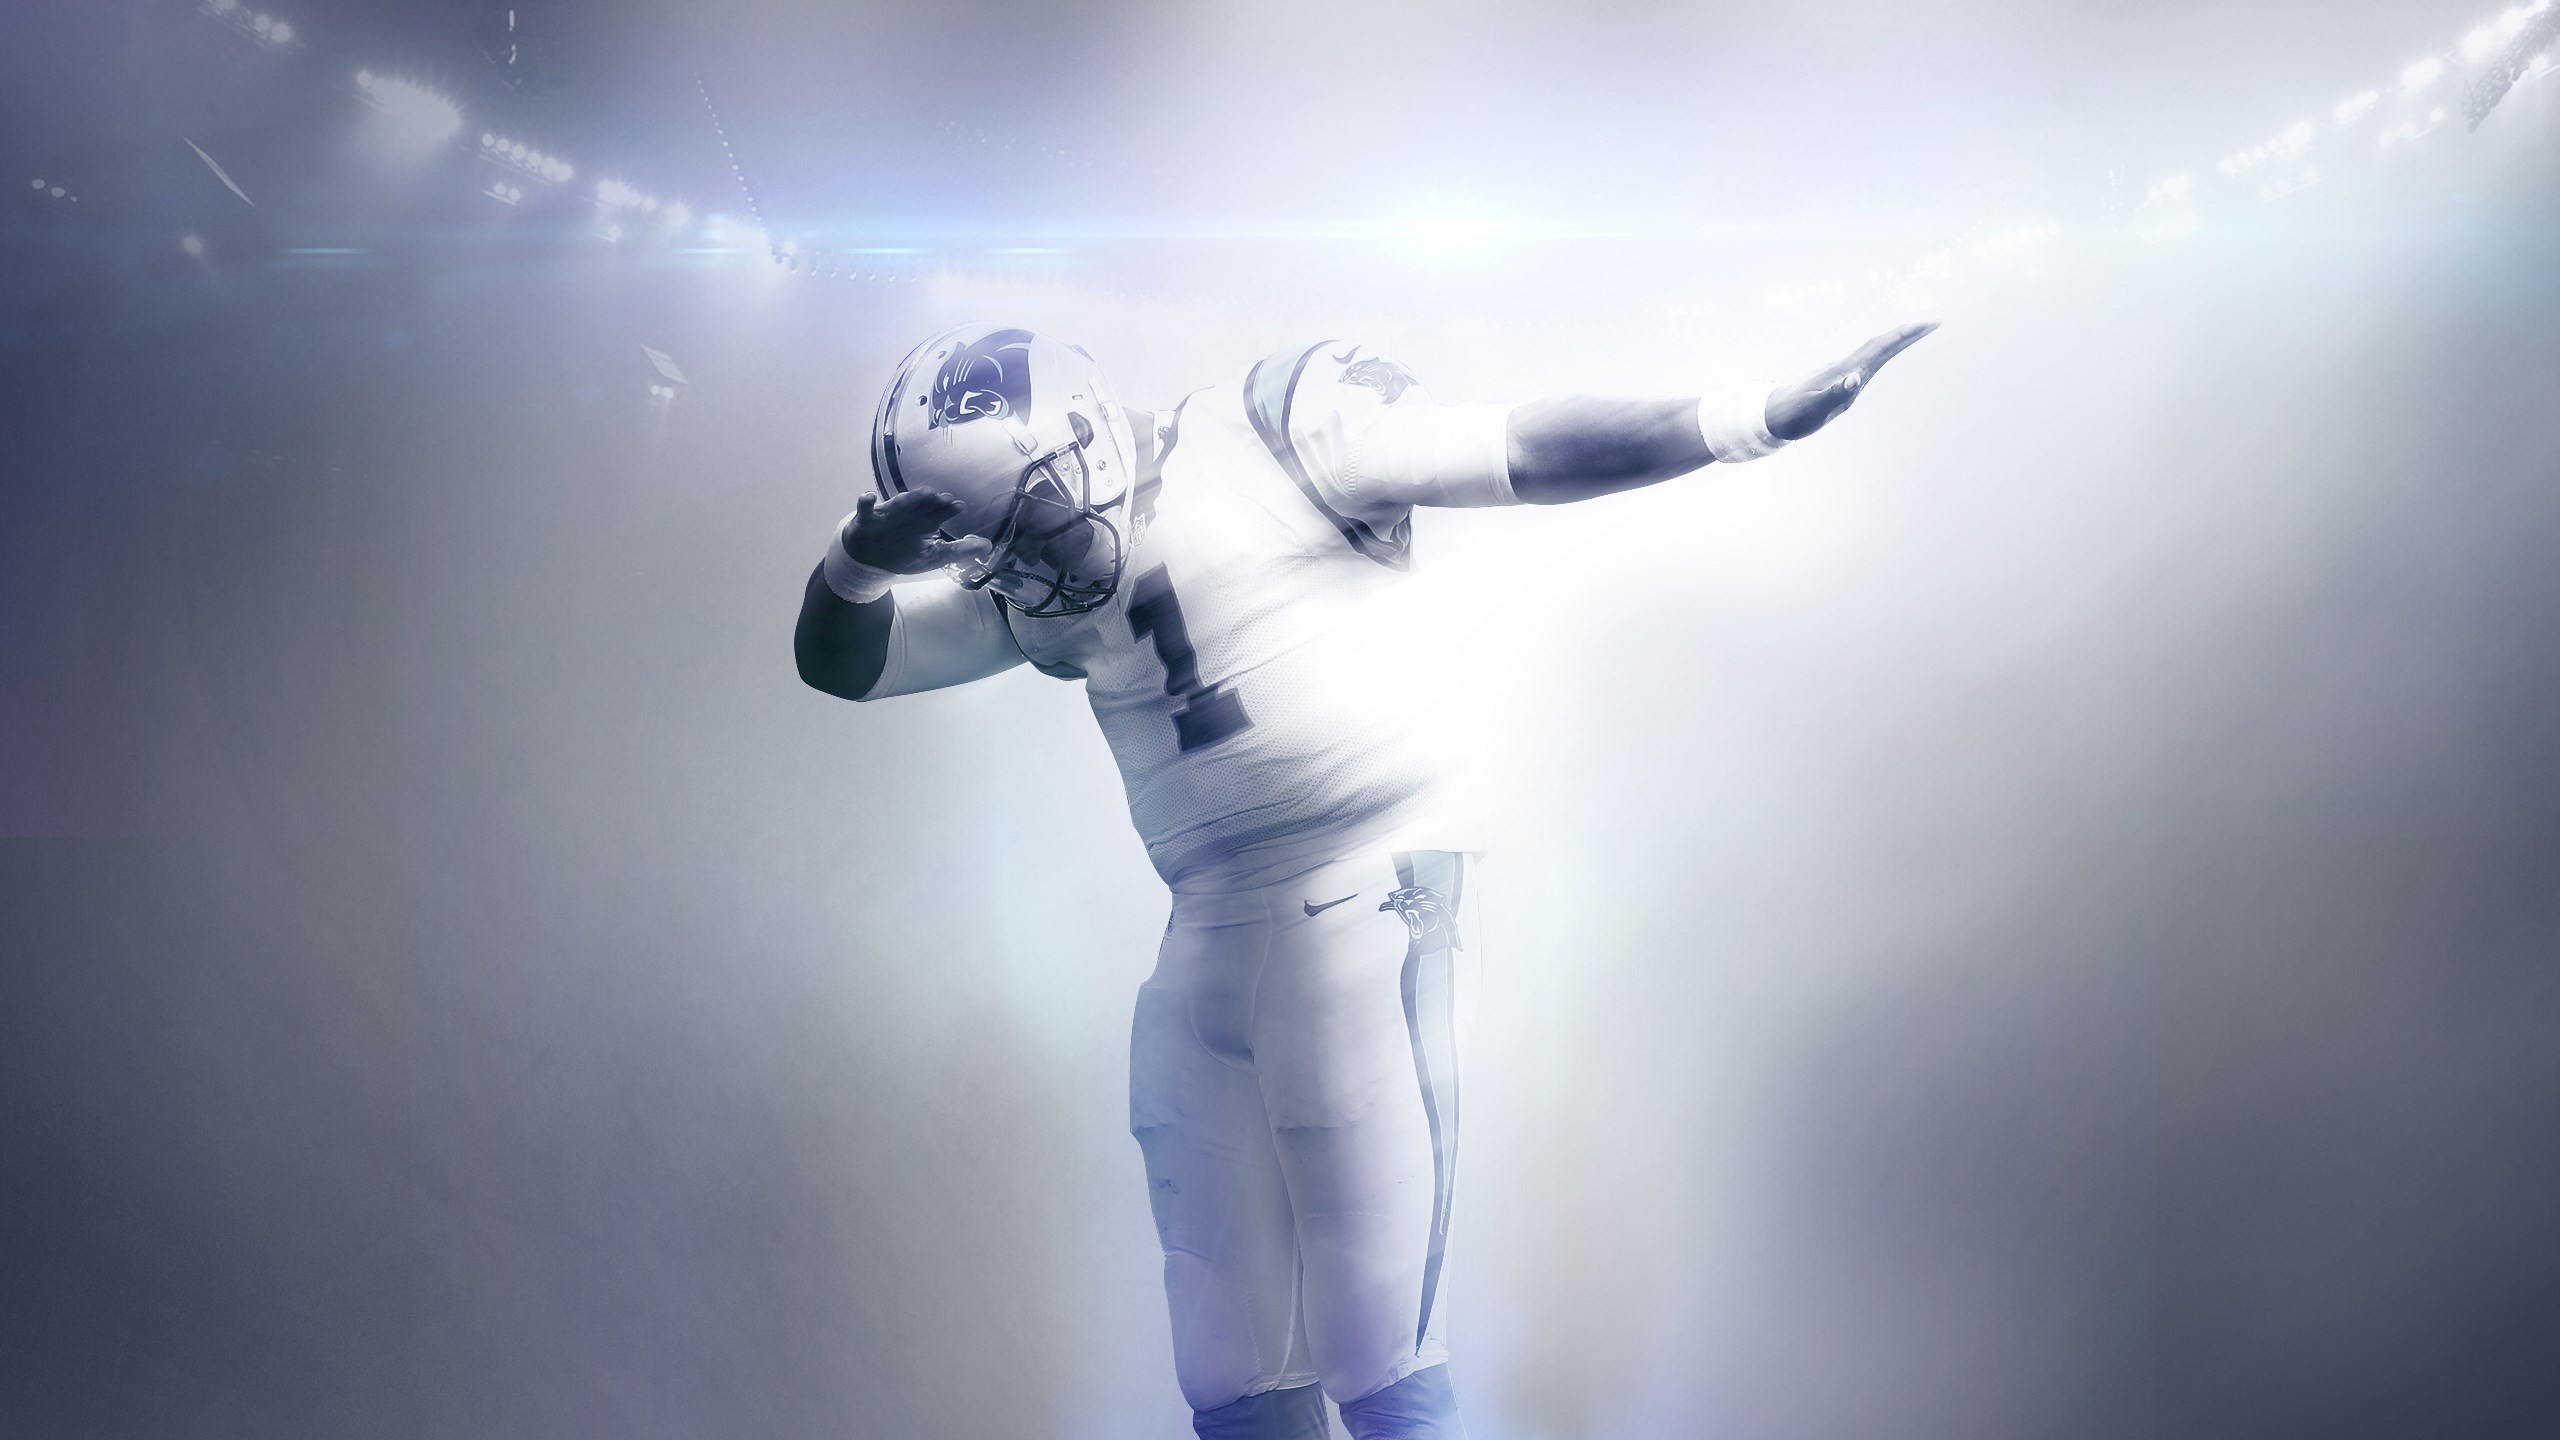 2560x1440 cam newton images free download